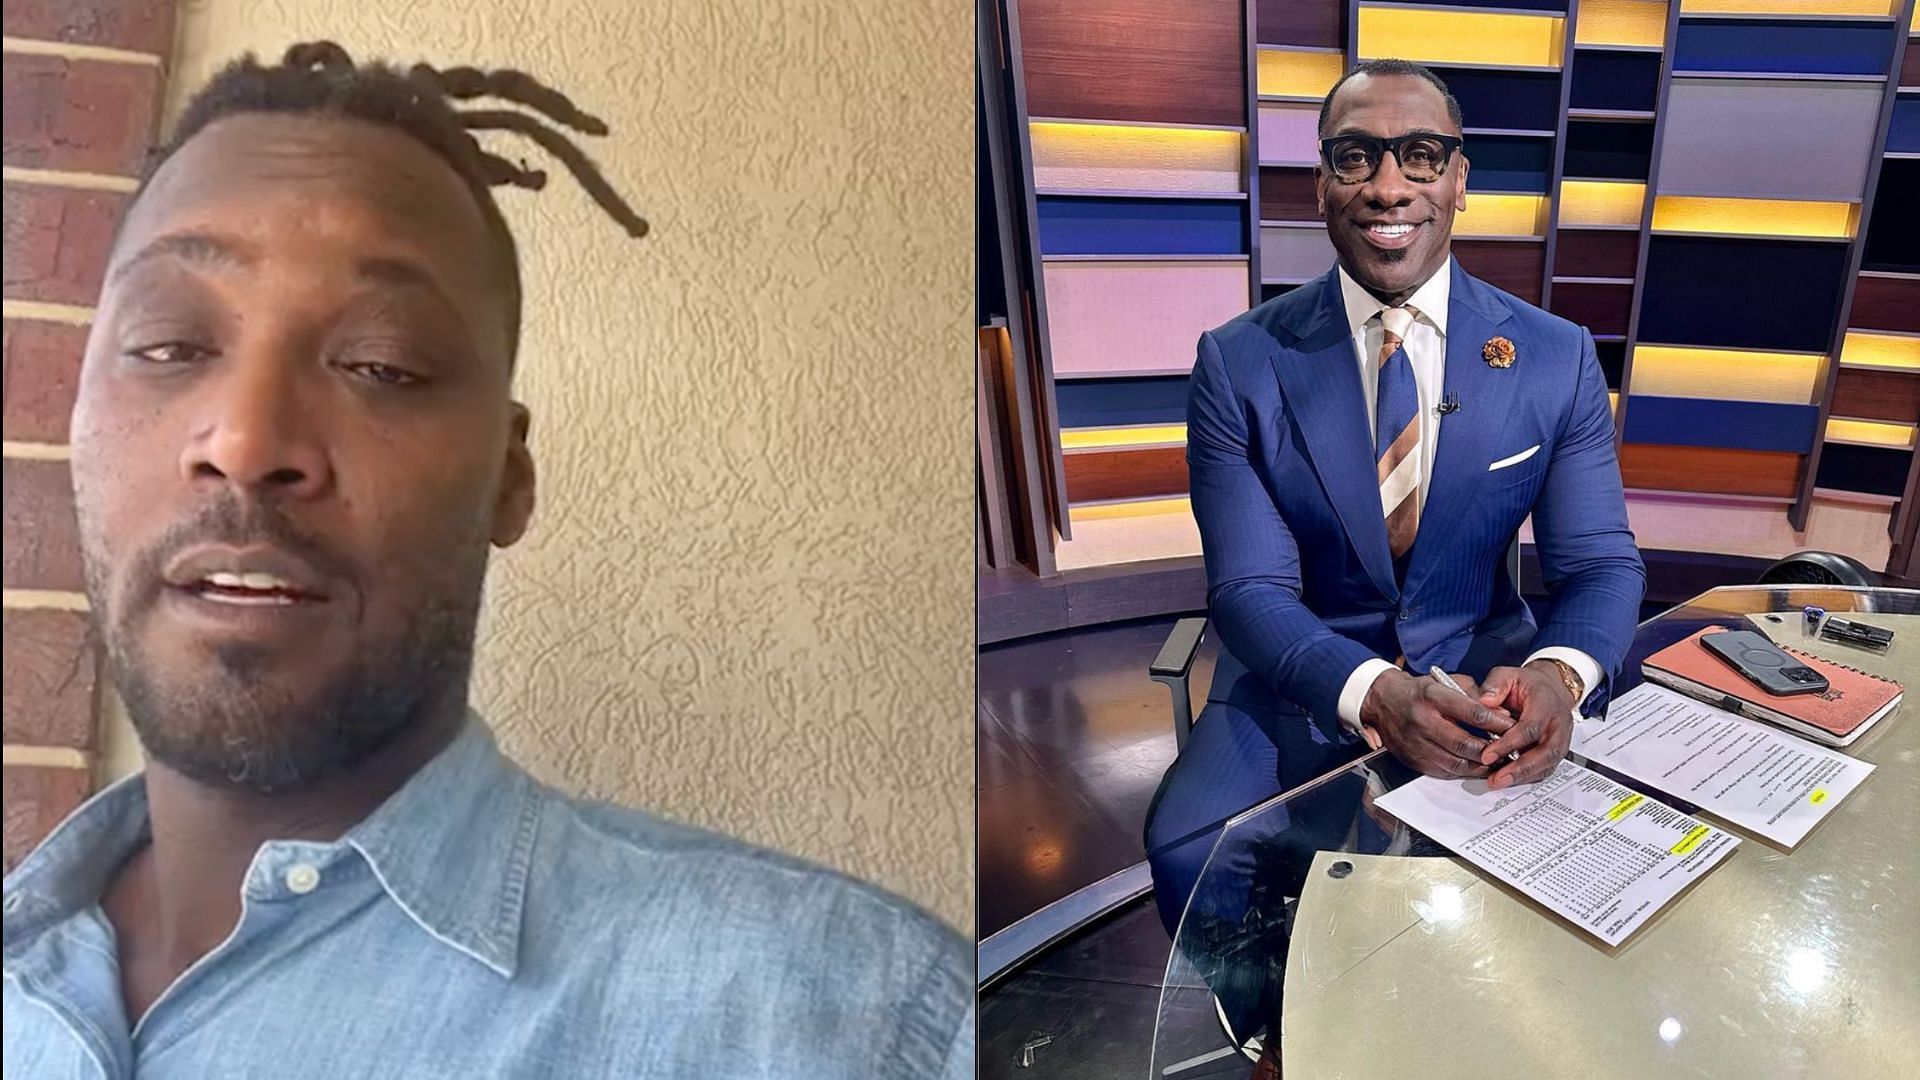 The story of the beef between former NBA player Kwame Brown (L) and NFL HOF Shannon Sharpe (R)